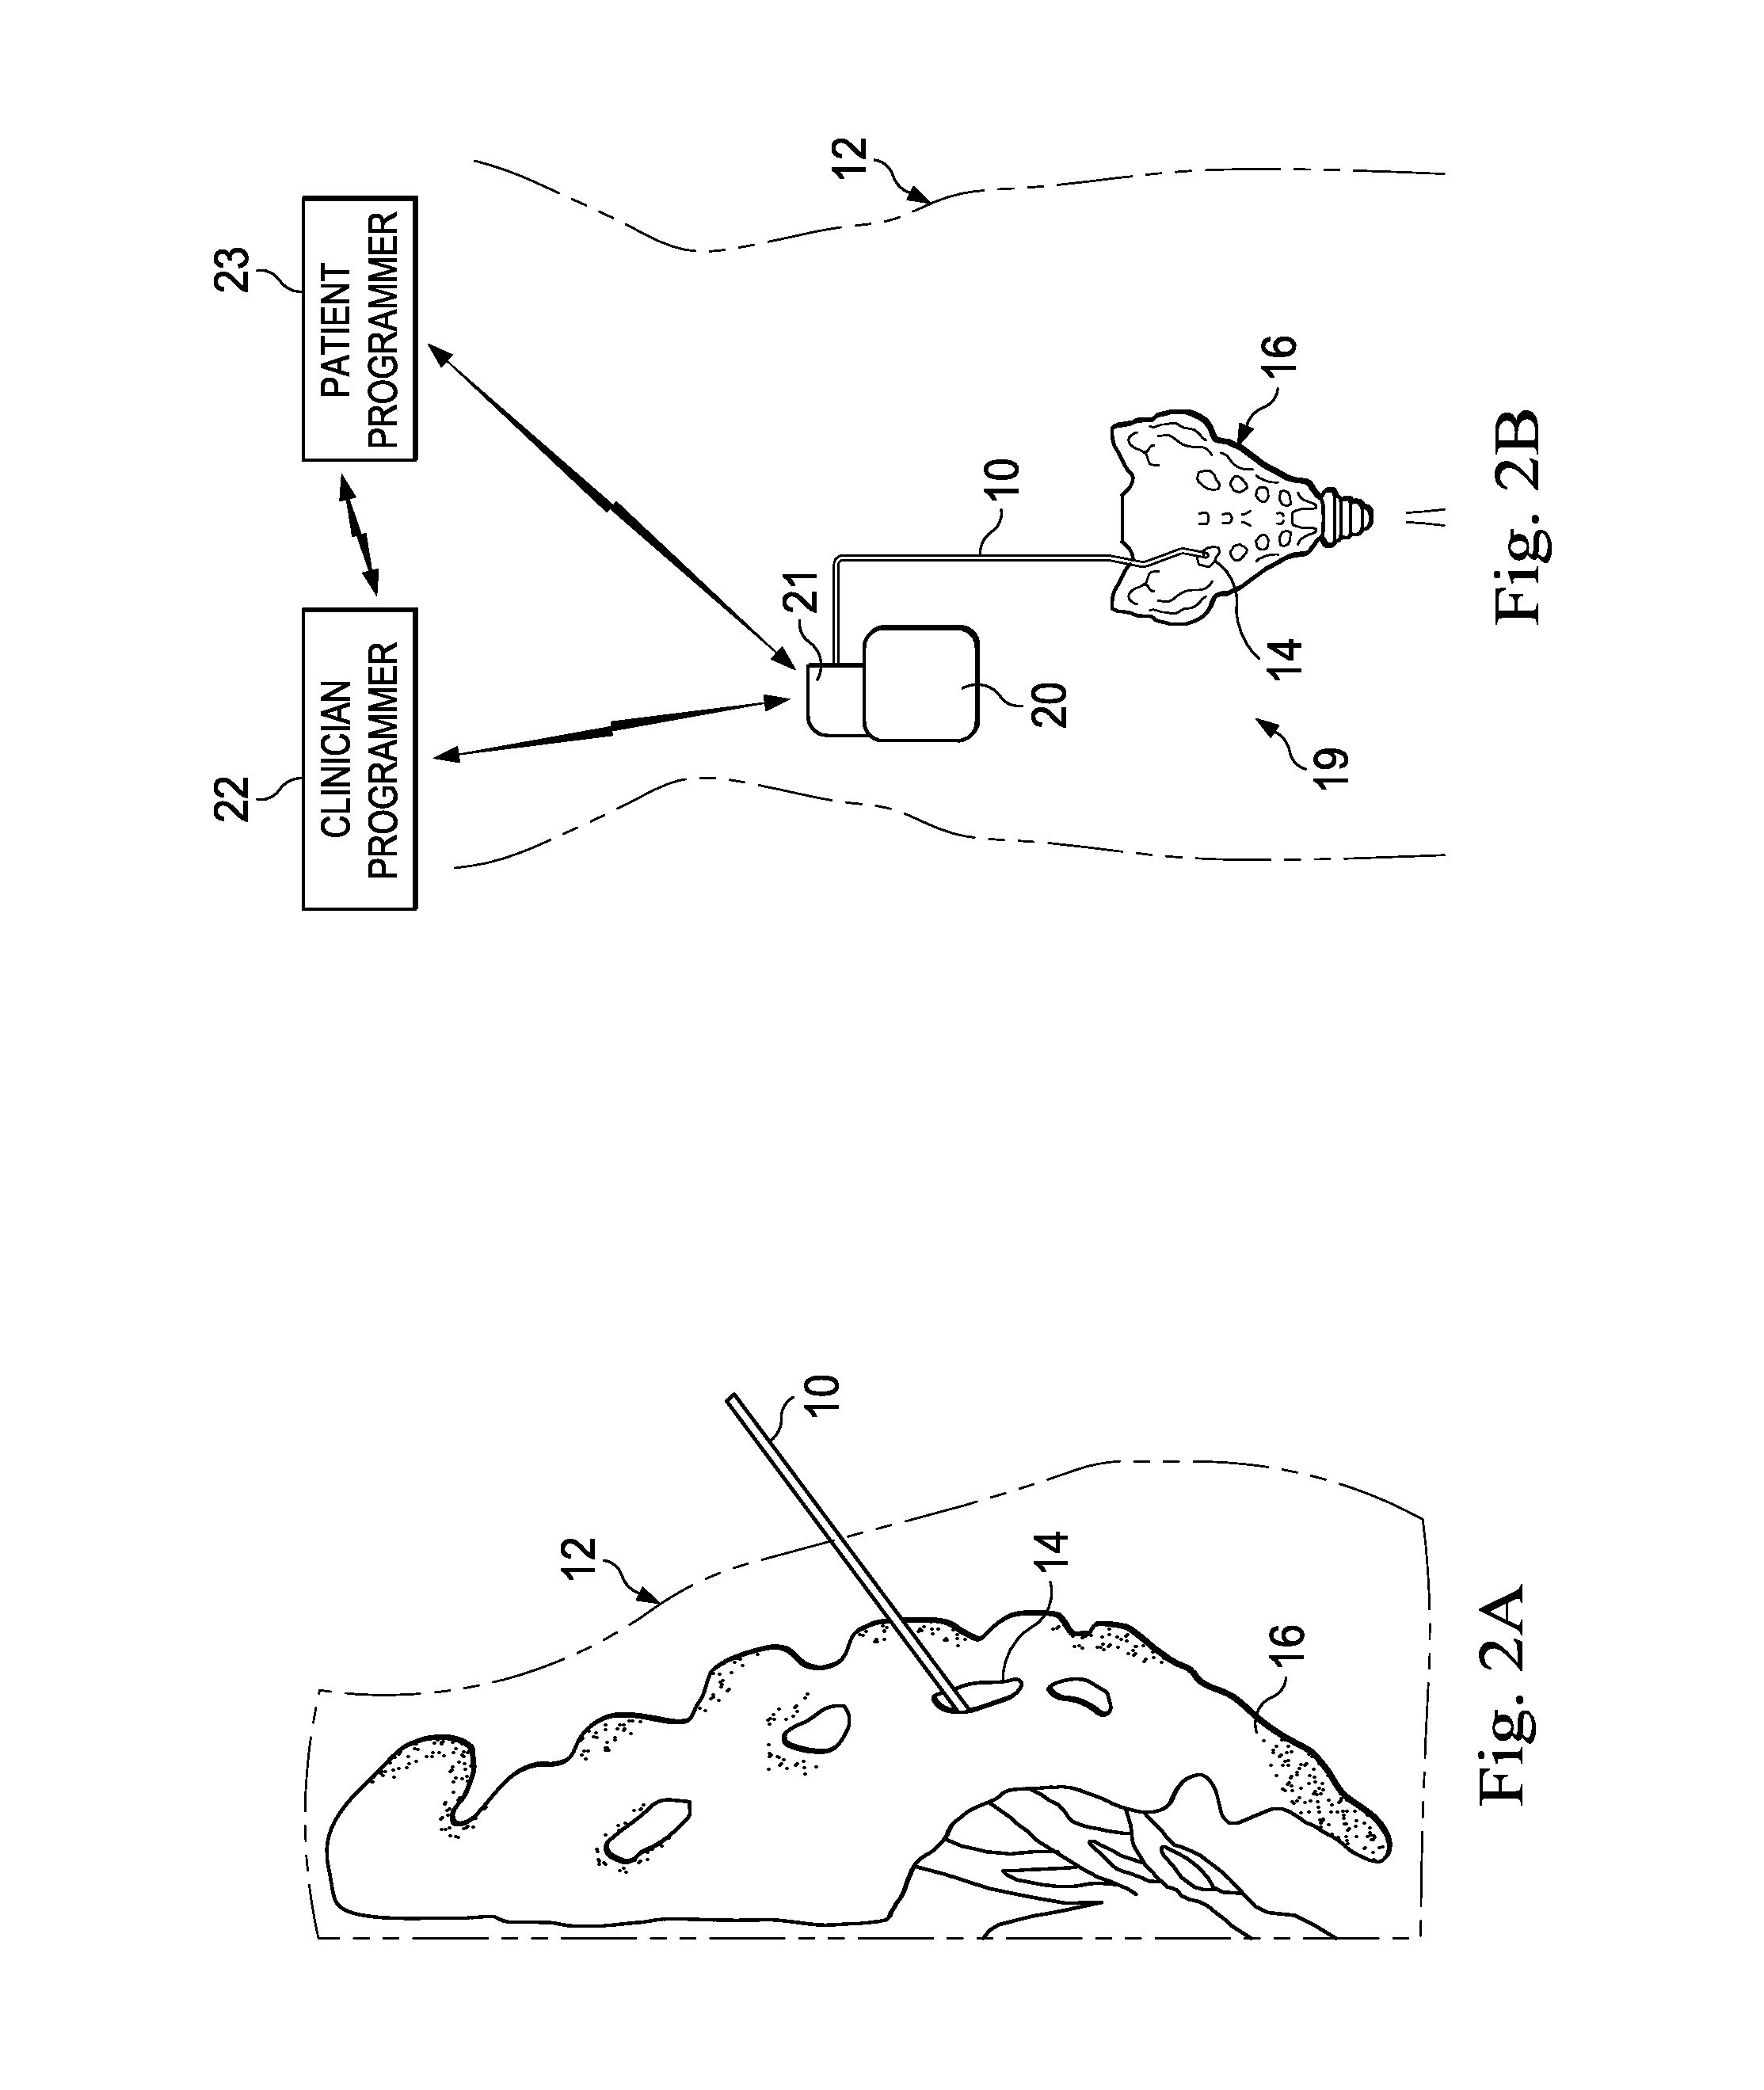 Systems, methods, and devices for generating arbitrary stimulation waveforms